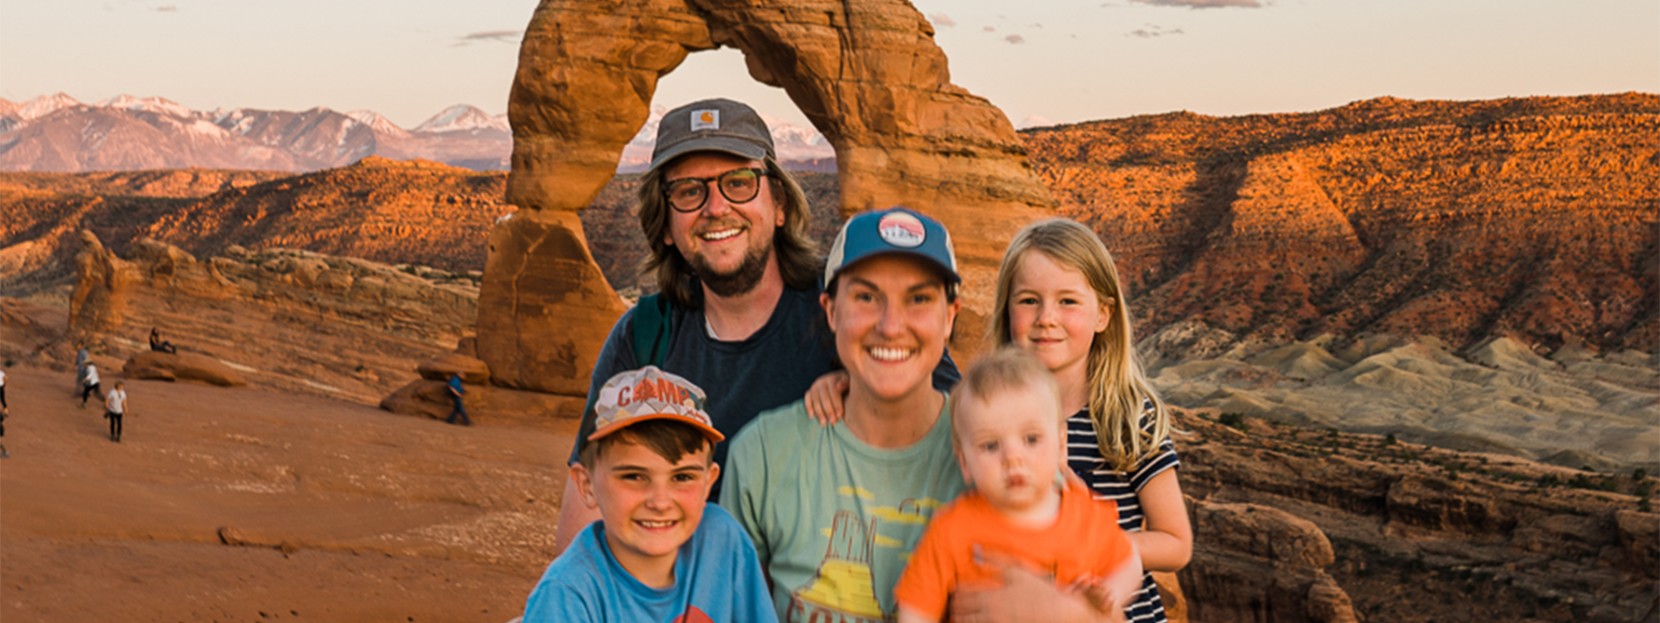 The Bowman Family posing in front of a rock formation.